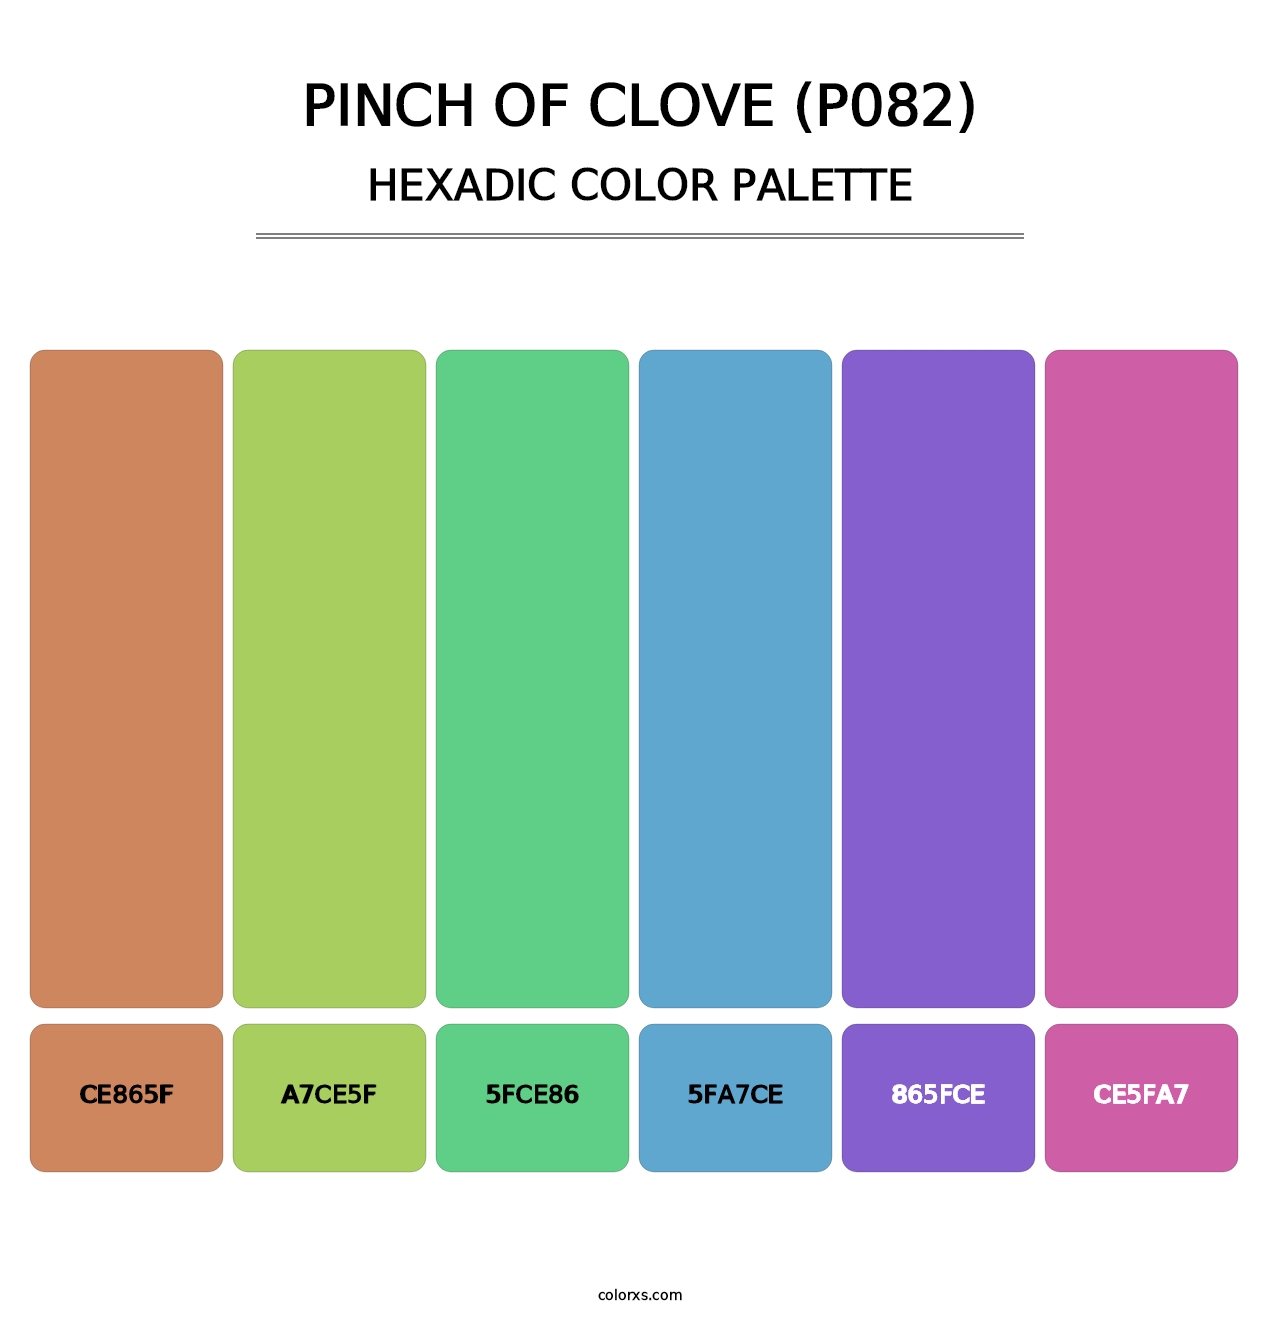 Pinch of Clove (P082) - Hexadic Color Palette